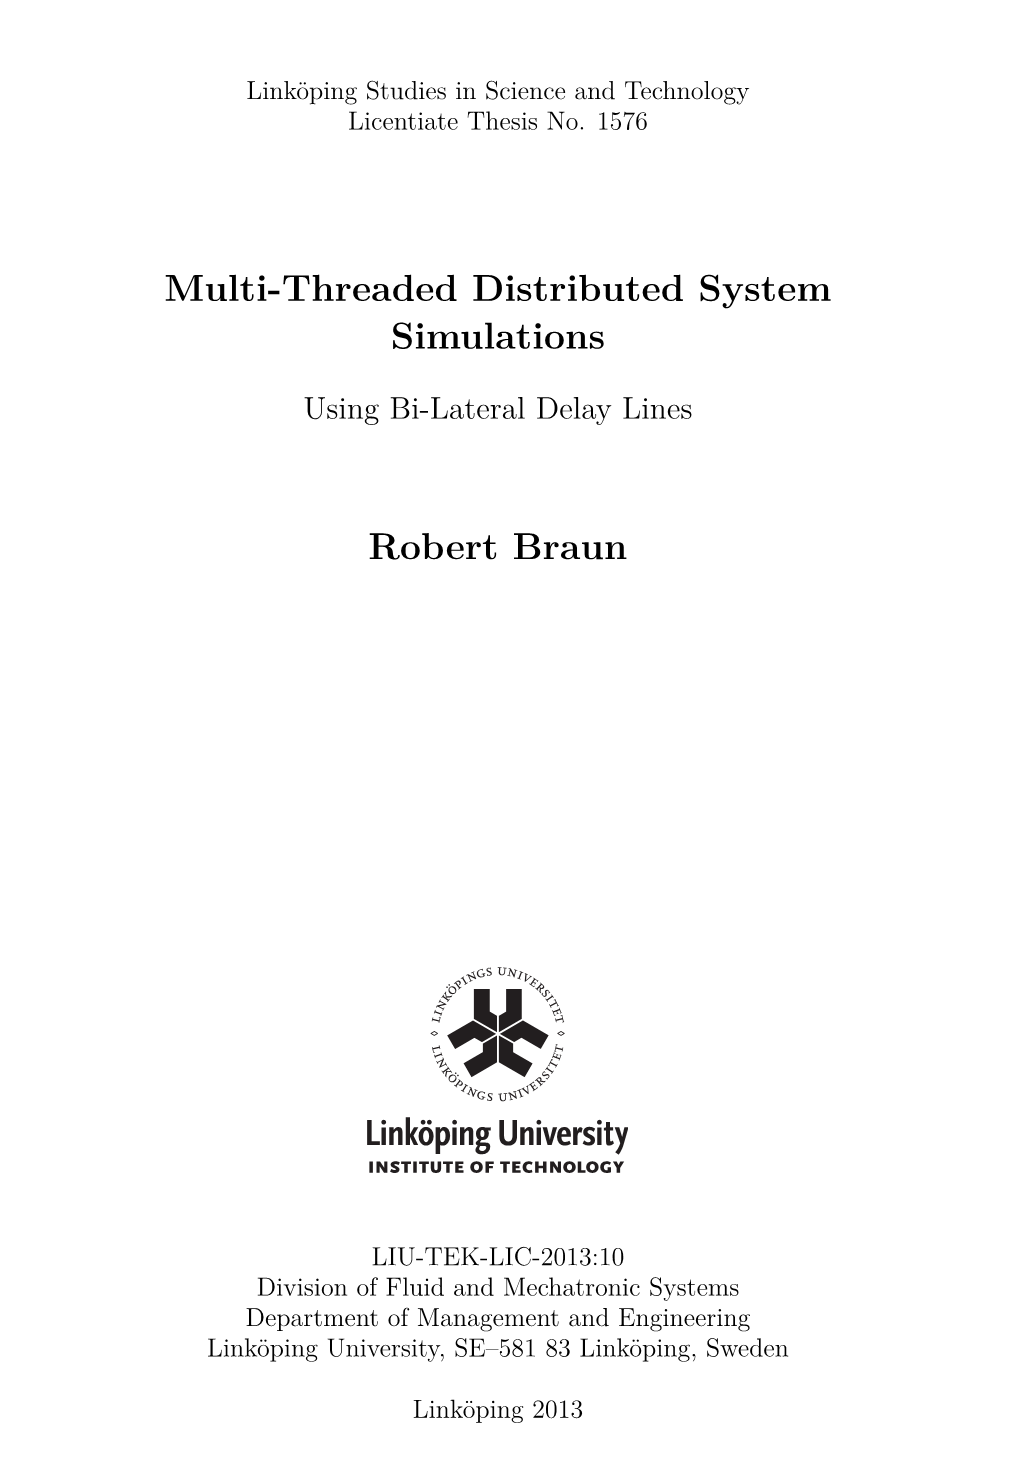 Multi-Threaded Distributed System Simulations